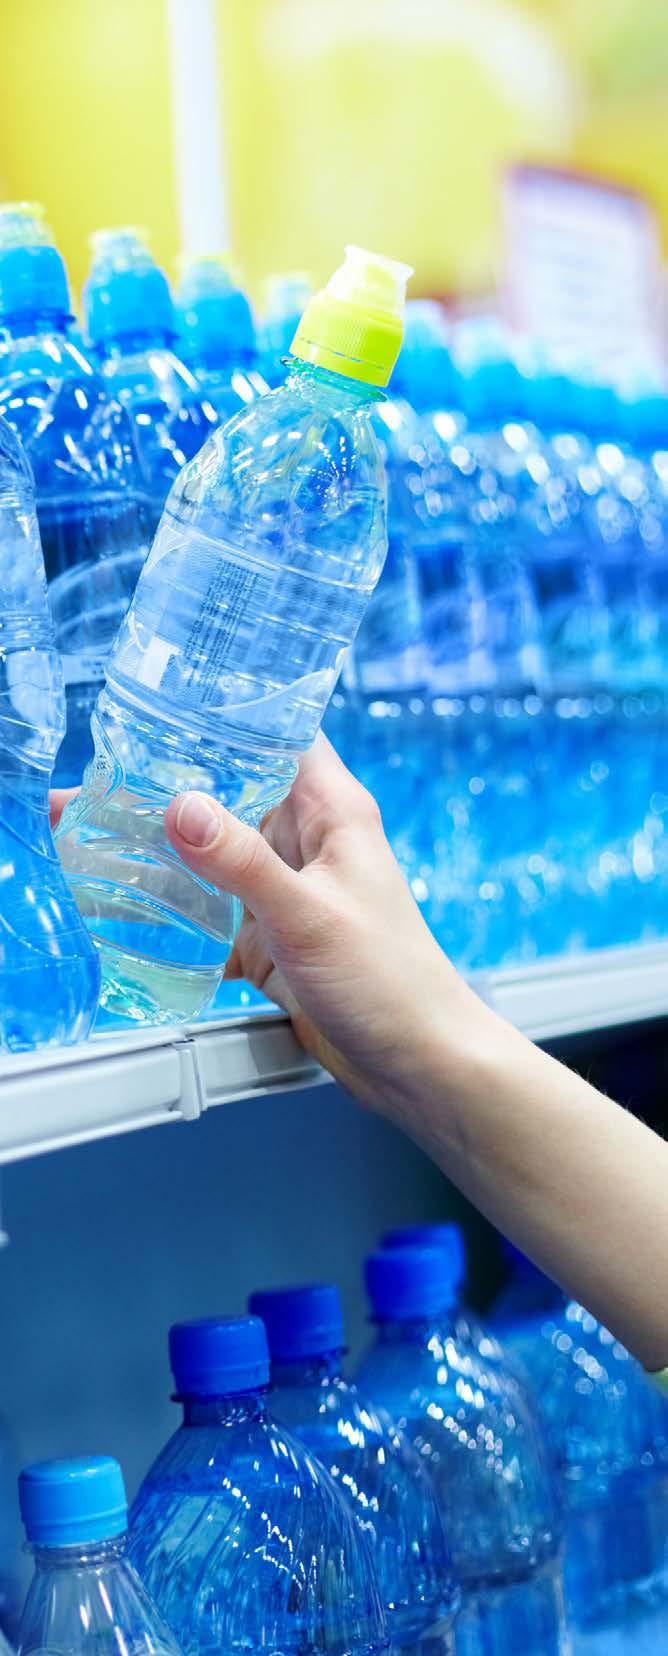 MANAGING SHELF LIFE OXYGEN SENSITIVE PRODUCTS Exposure to oxygen can be detrimental for a range of different foods and beverages typically fruit and vegetable juices, alcoholic beverages, teas, dairy